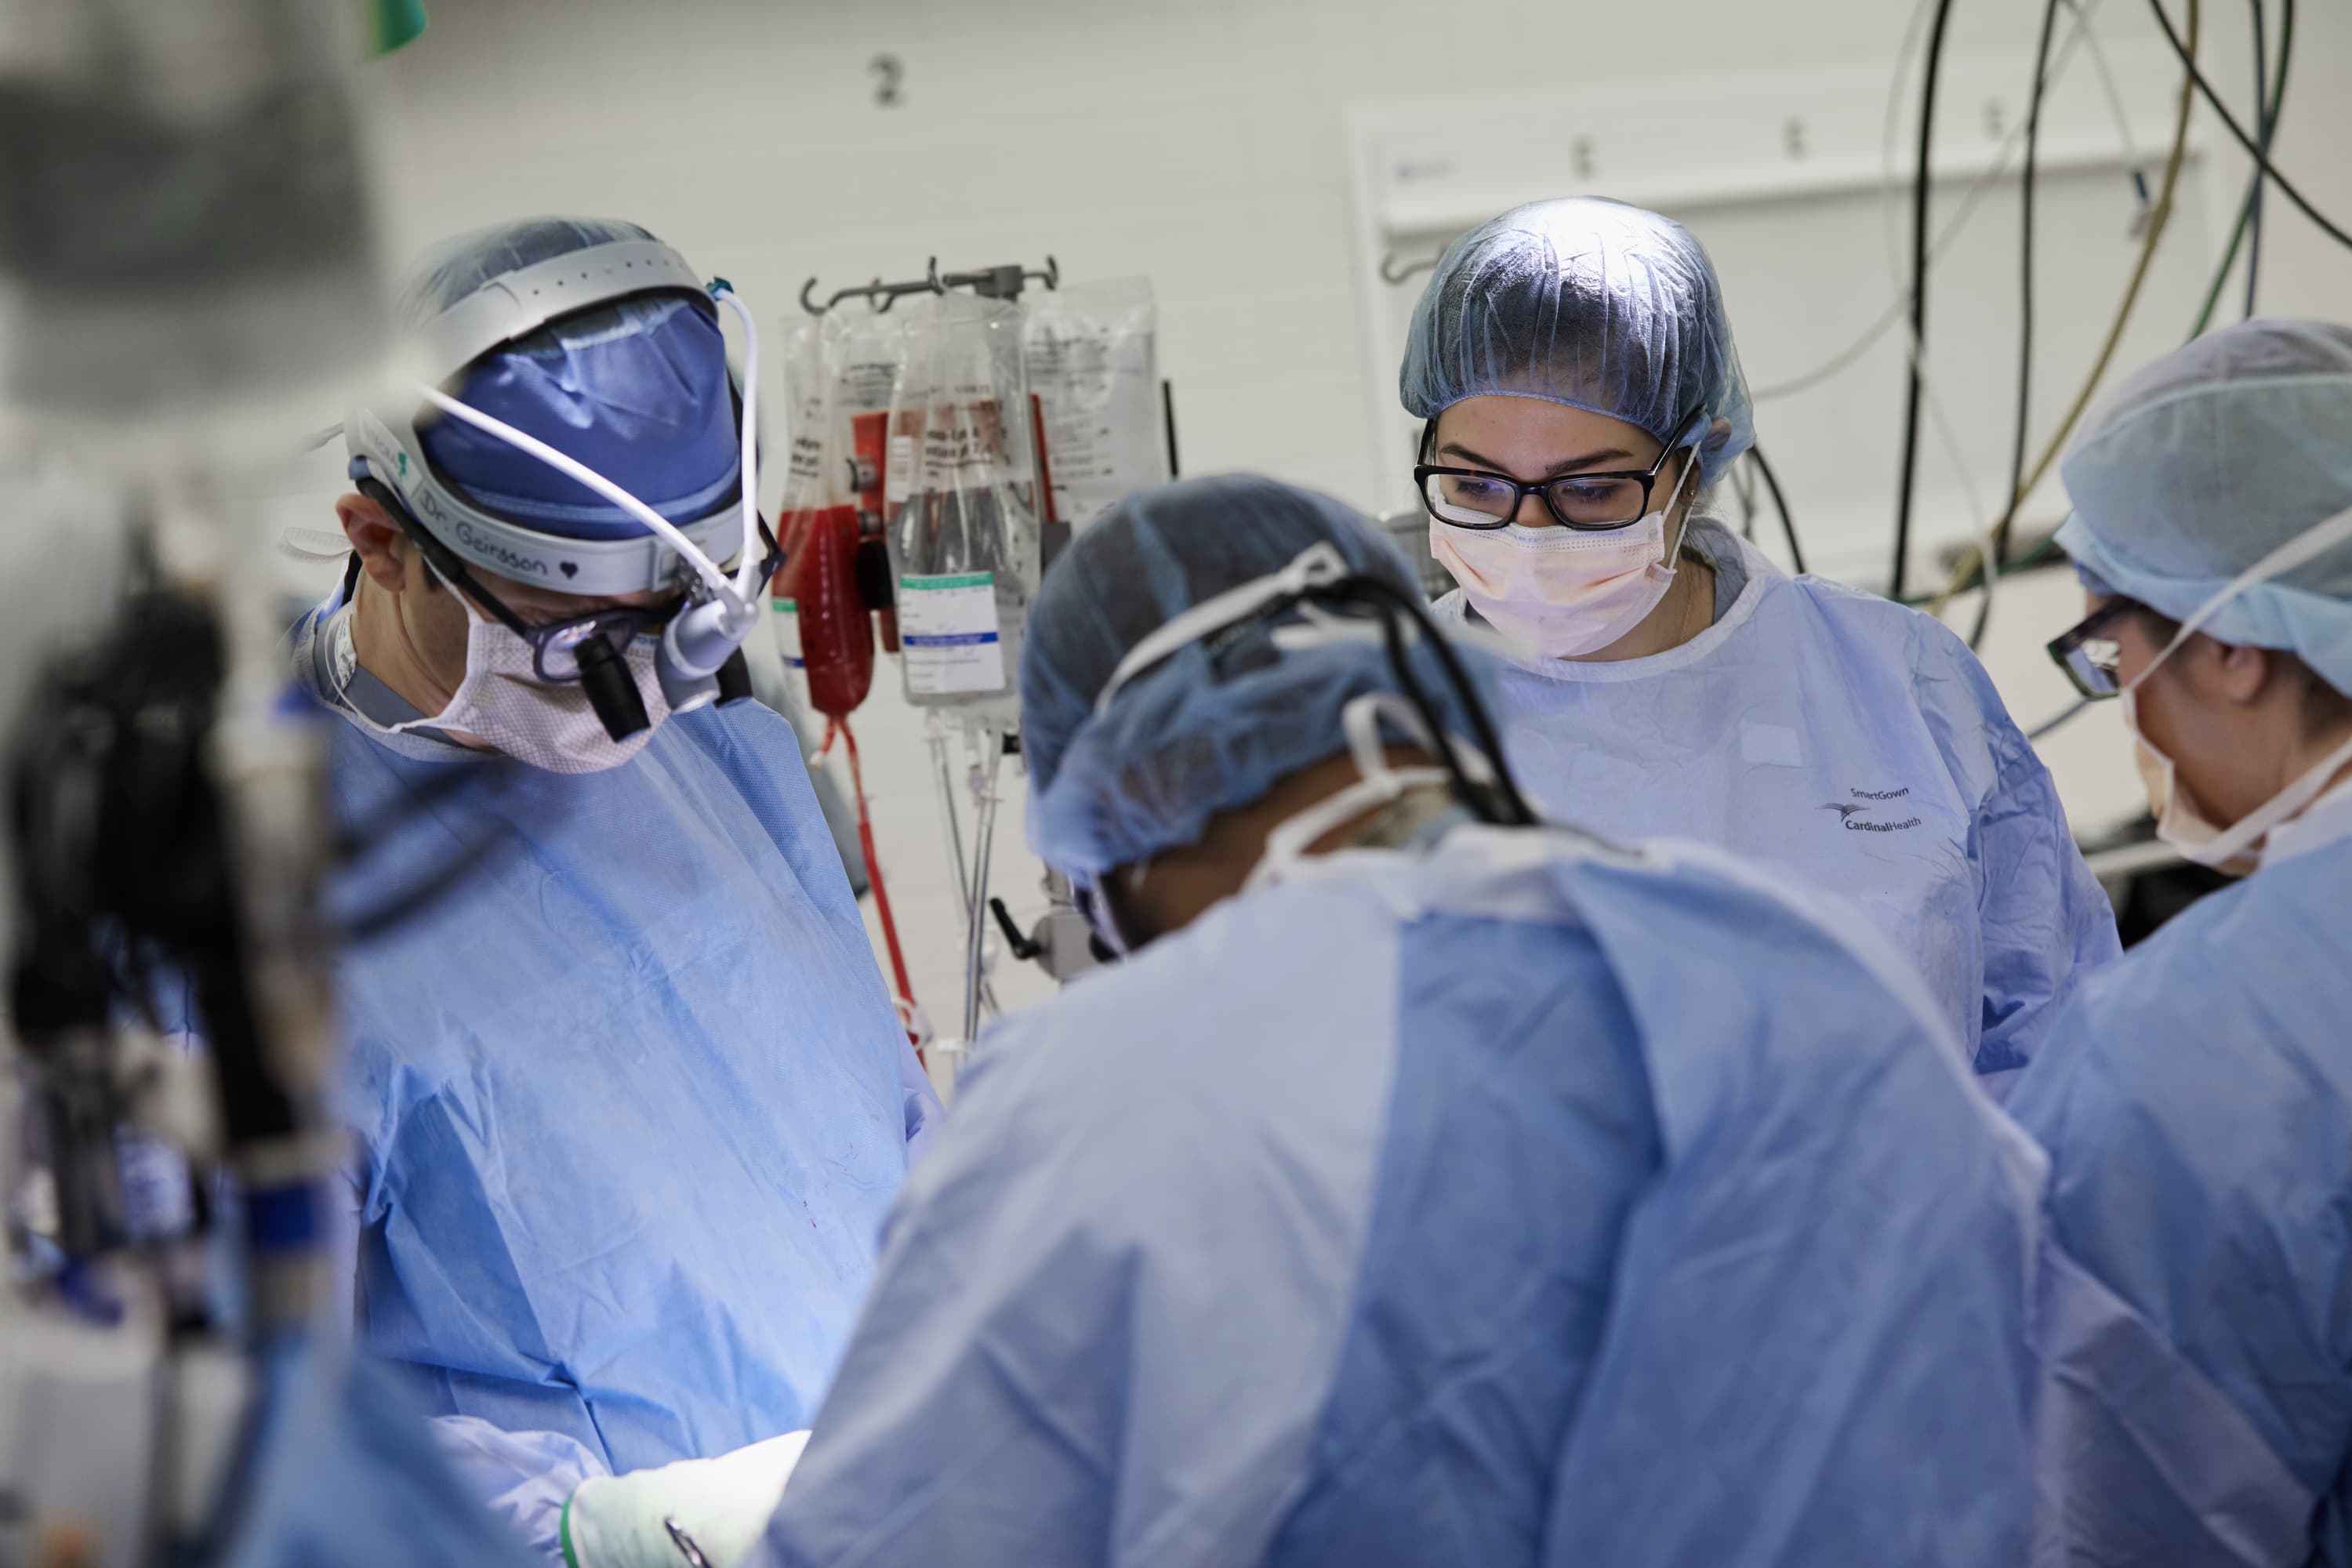 Arnar Geirsson, MD, with surgical staff performing surgery